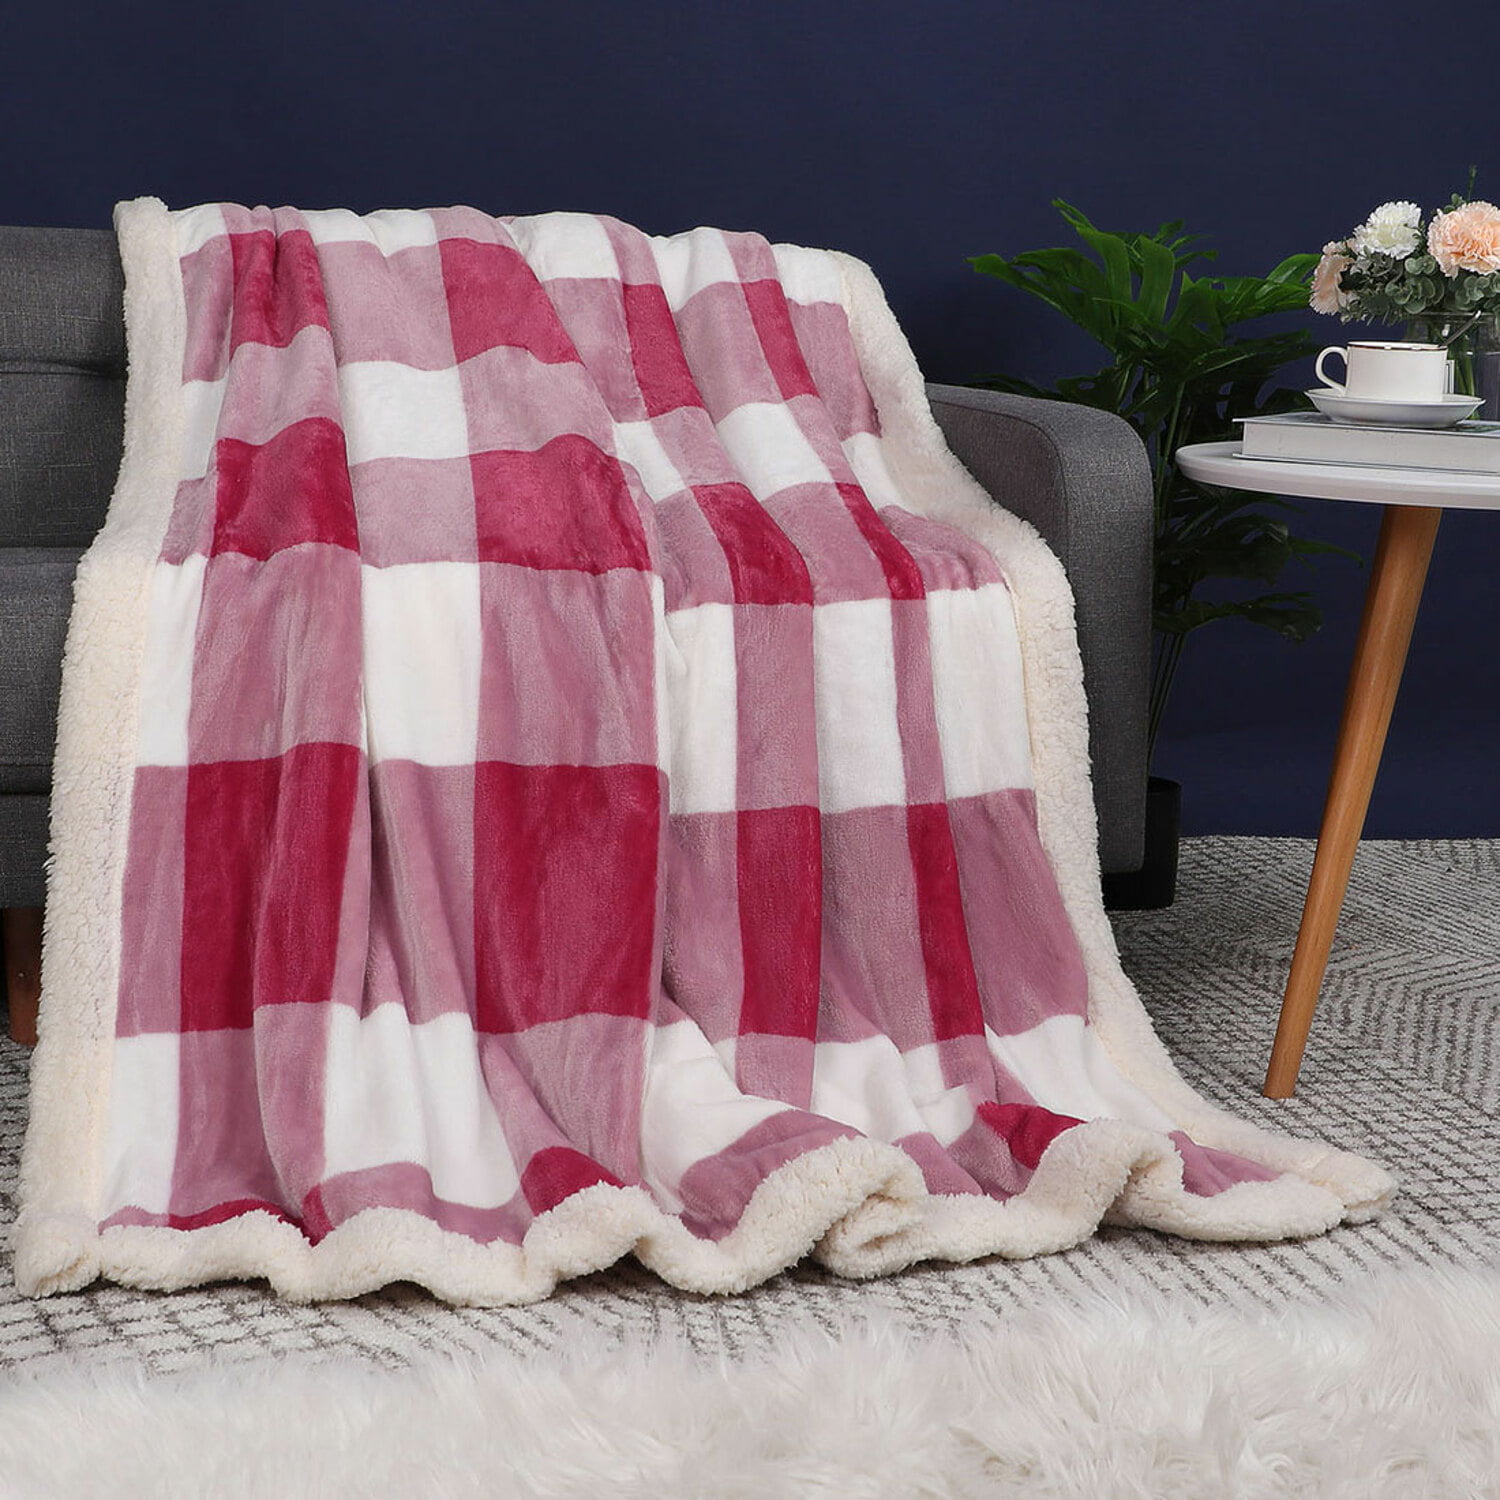 Love and Peace Flannel Blanket,Soft Bedding Fleece Throw Couch Cover Decorative Blanket for Home Bed Sofa & Dorm 80x60 